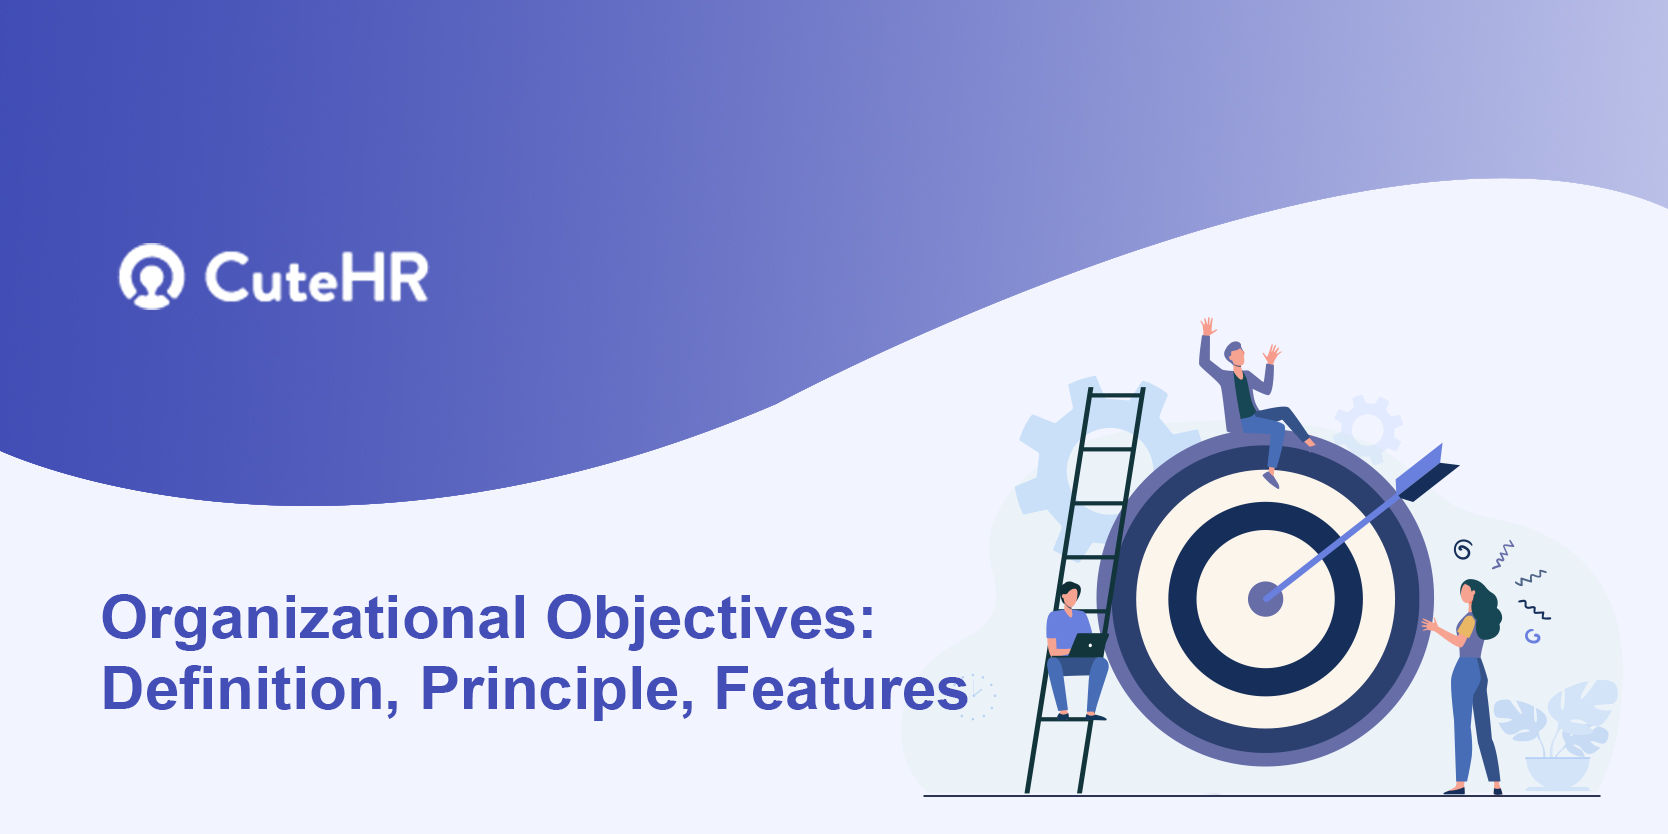 Organizational Objectives: Definition, Principle, Features